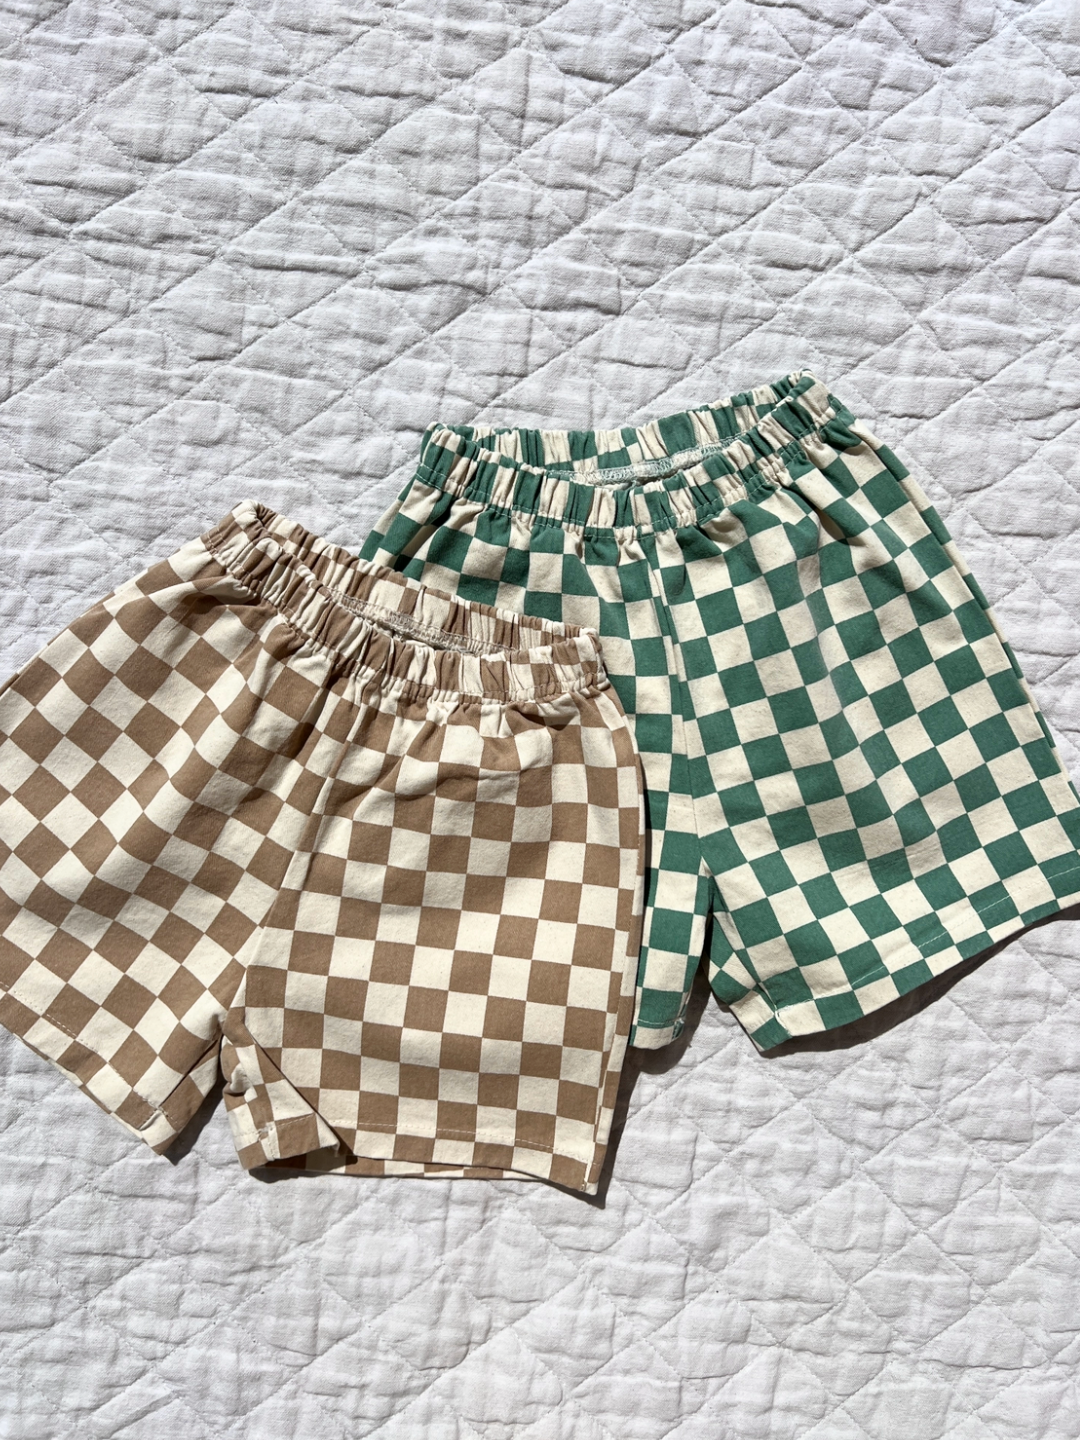 Two pars of kids Frankie shorts are laid out on a white canvas quilt. The pair on top is tan and ecru checkerboard, the pair behind is teal and ecru checkerboard.